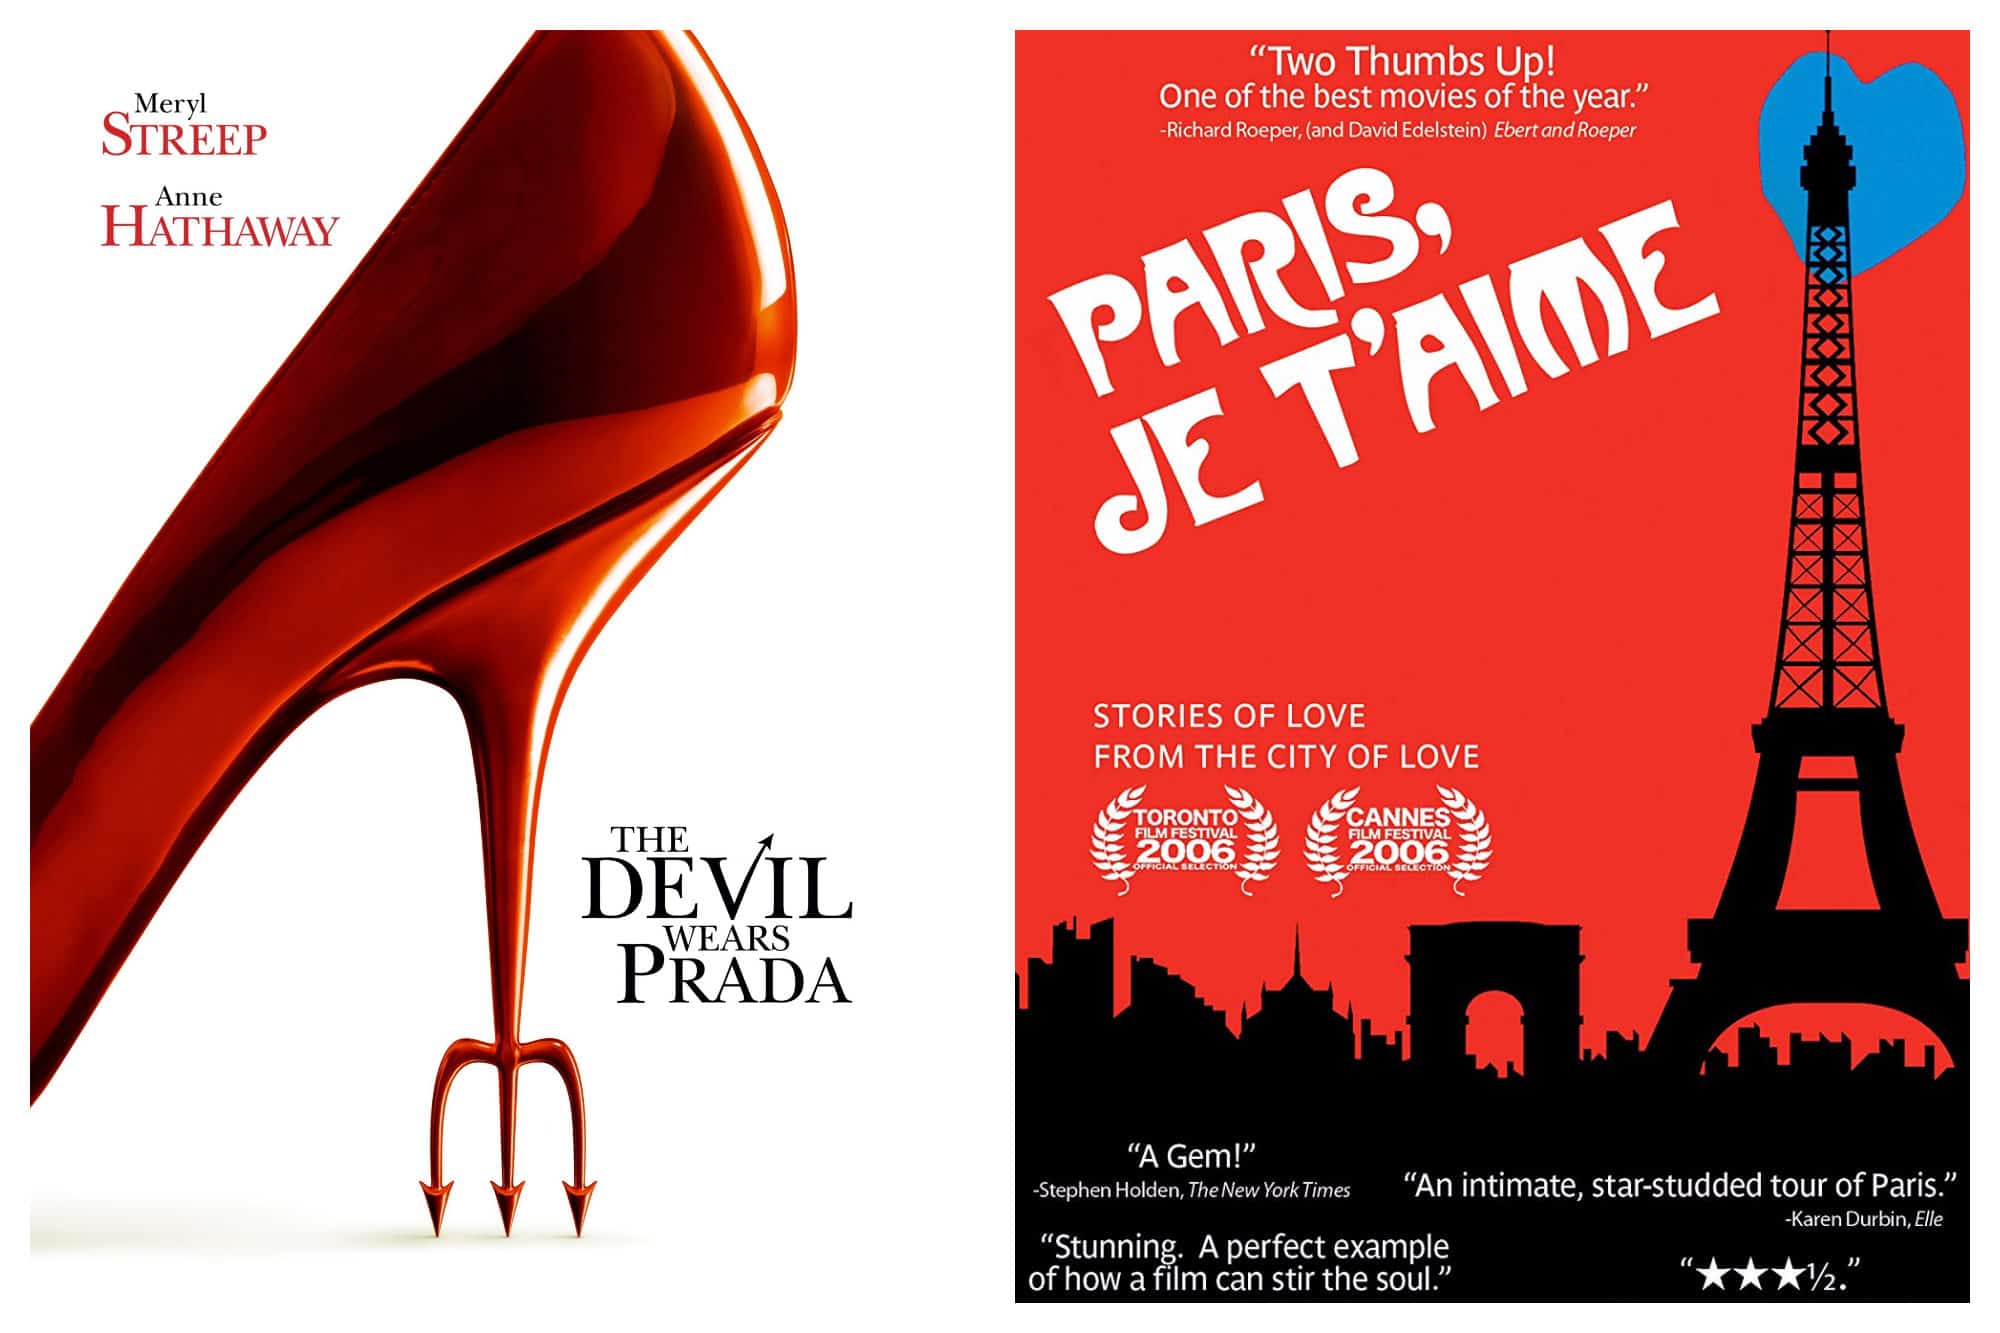 A poster for the movie "The Devil Wears Prada" (left) and a poster for the collection of short films "Paris, Je t'Aime."